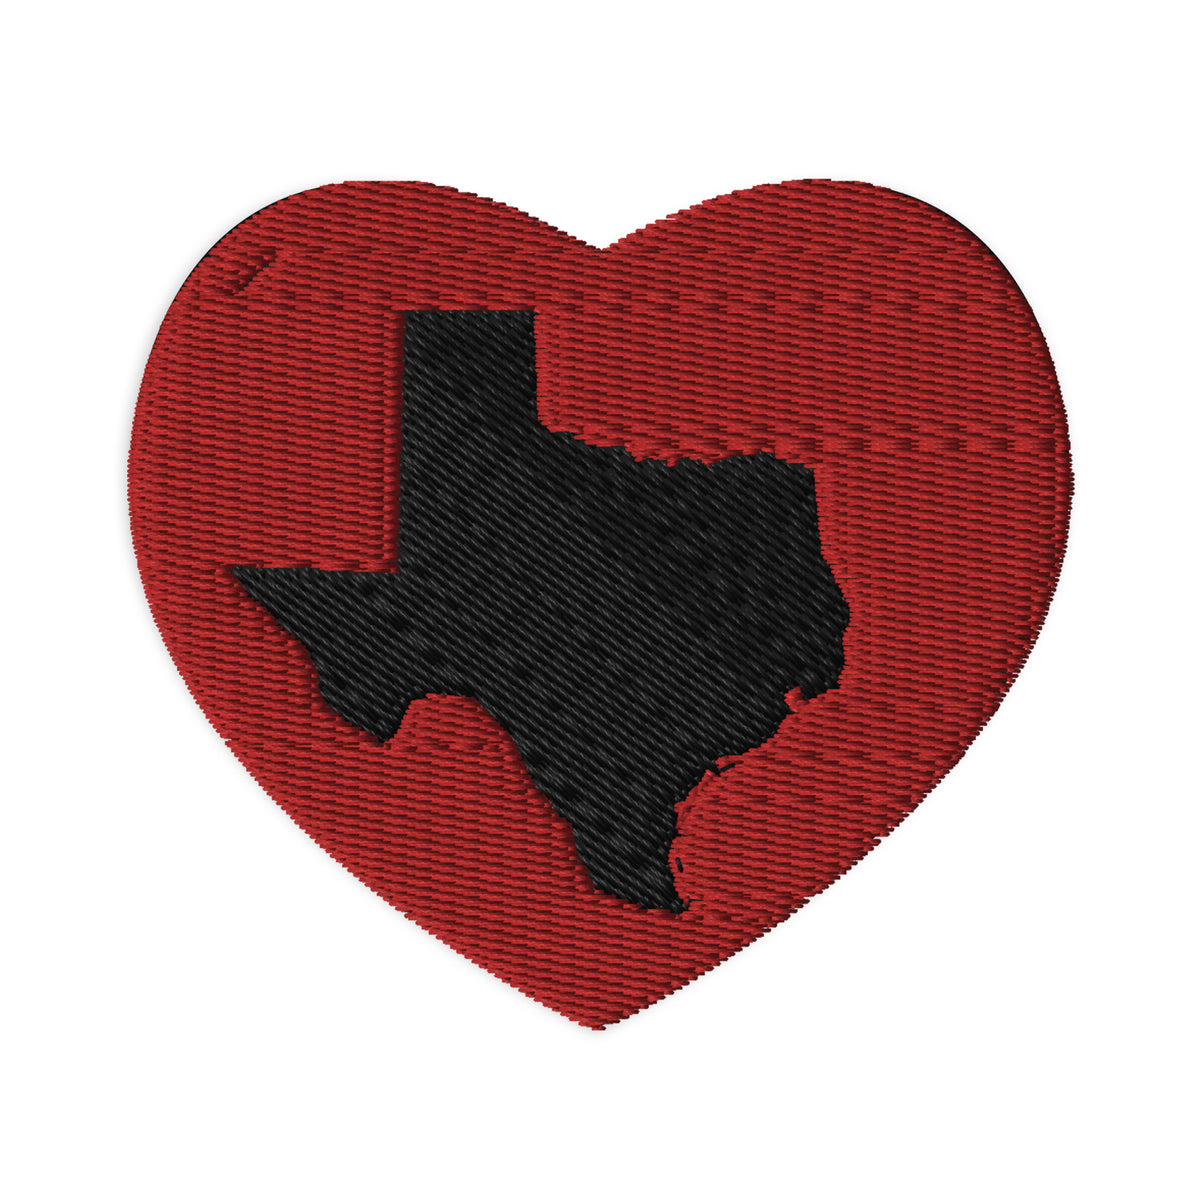 Heart of Texas Patch